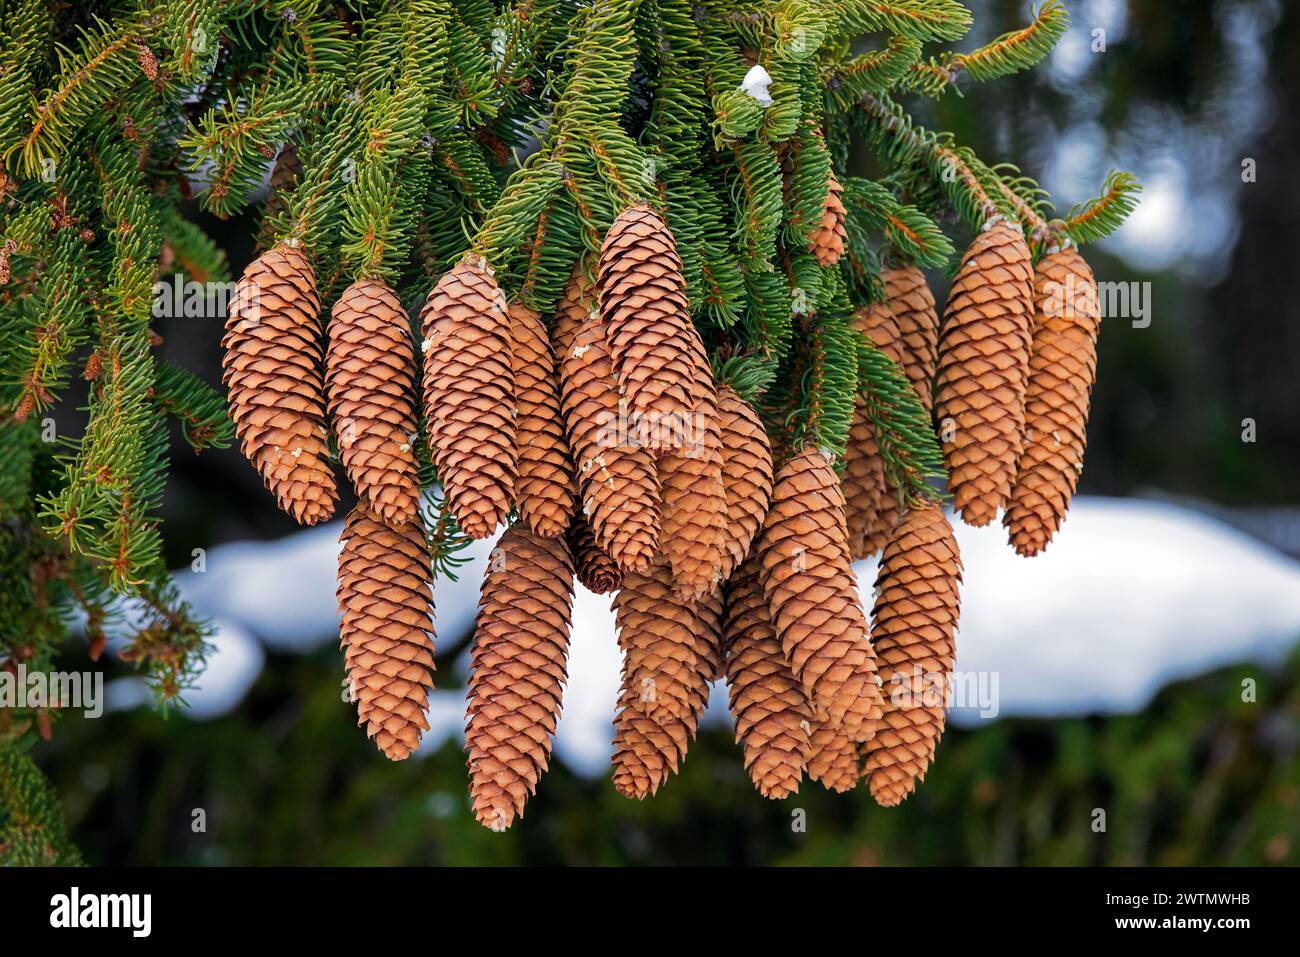 Norway spruce / European spruce (Picea abies) close-up of cones with pointed scales and needle-like evergreen leaves in the Alps in winter Stock Photo